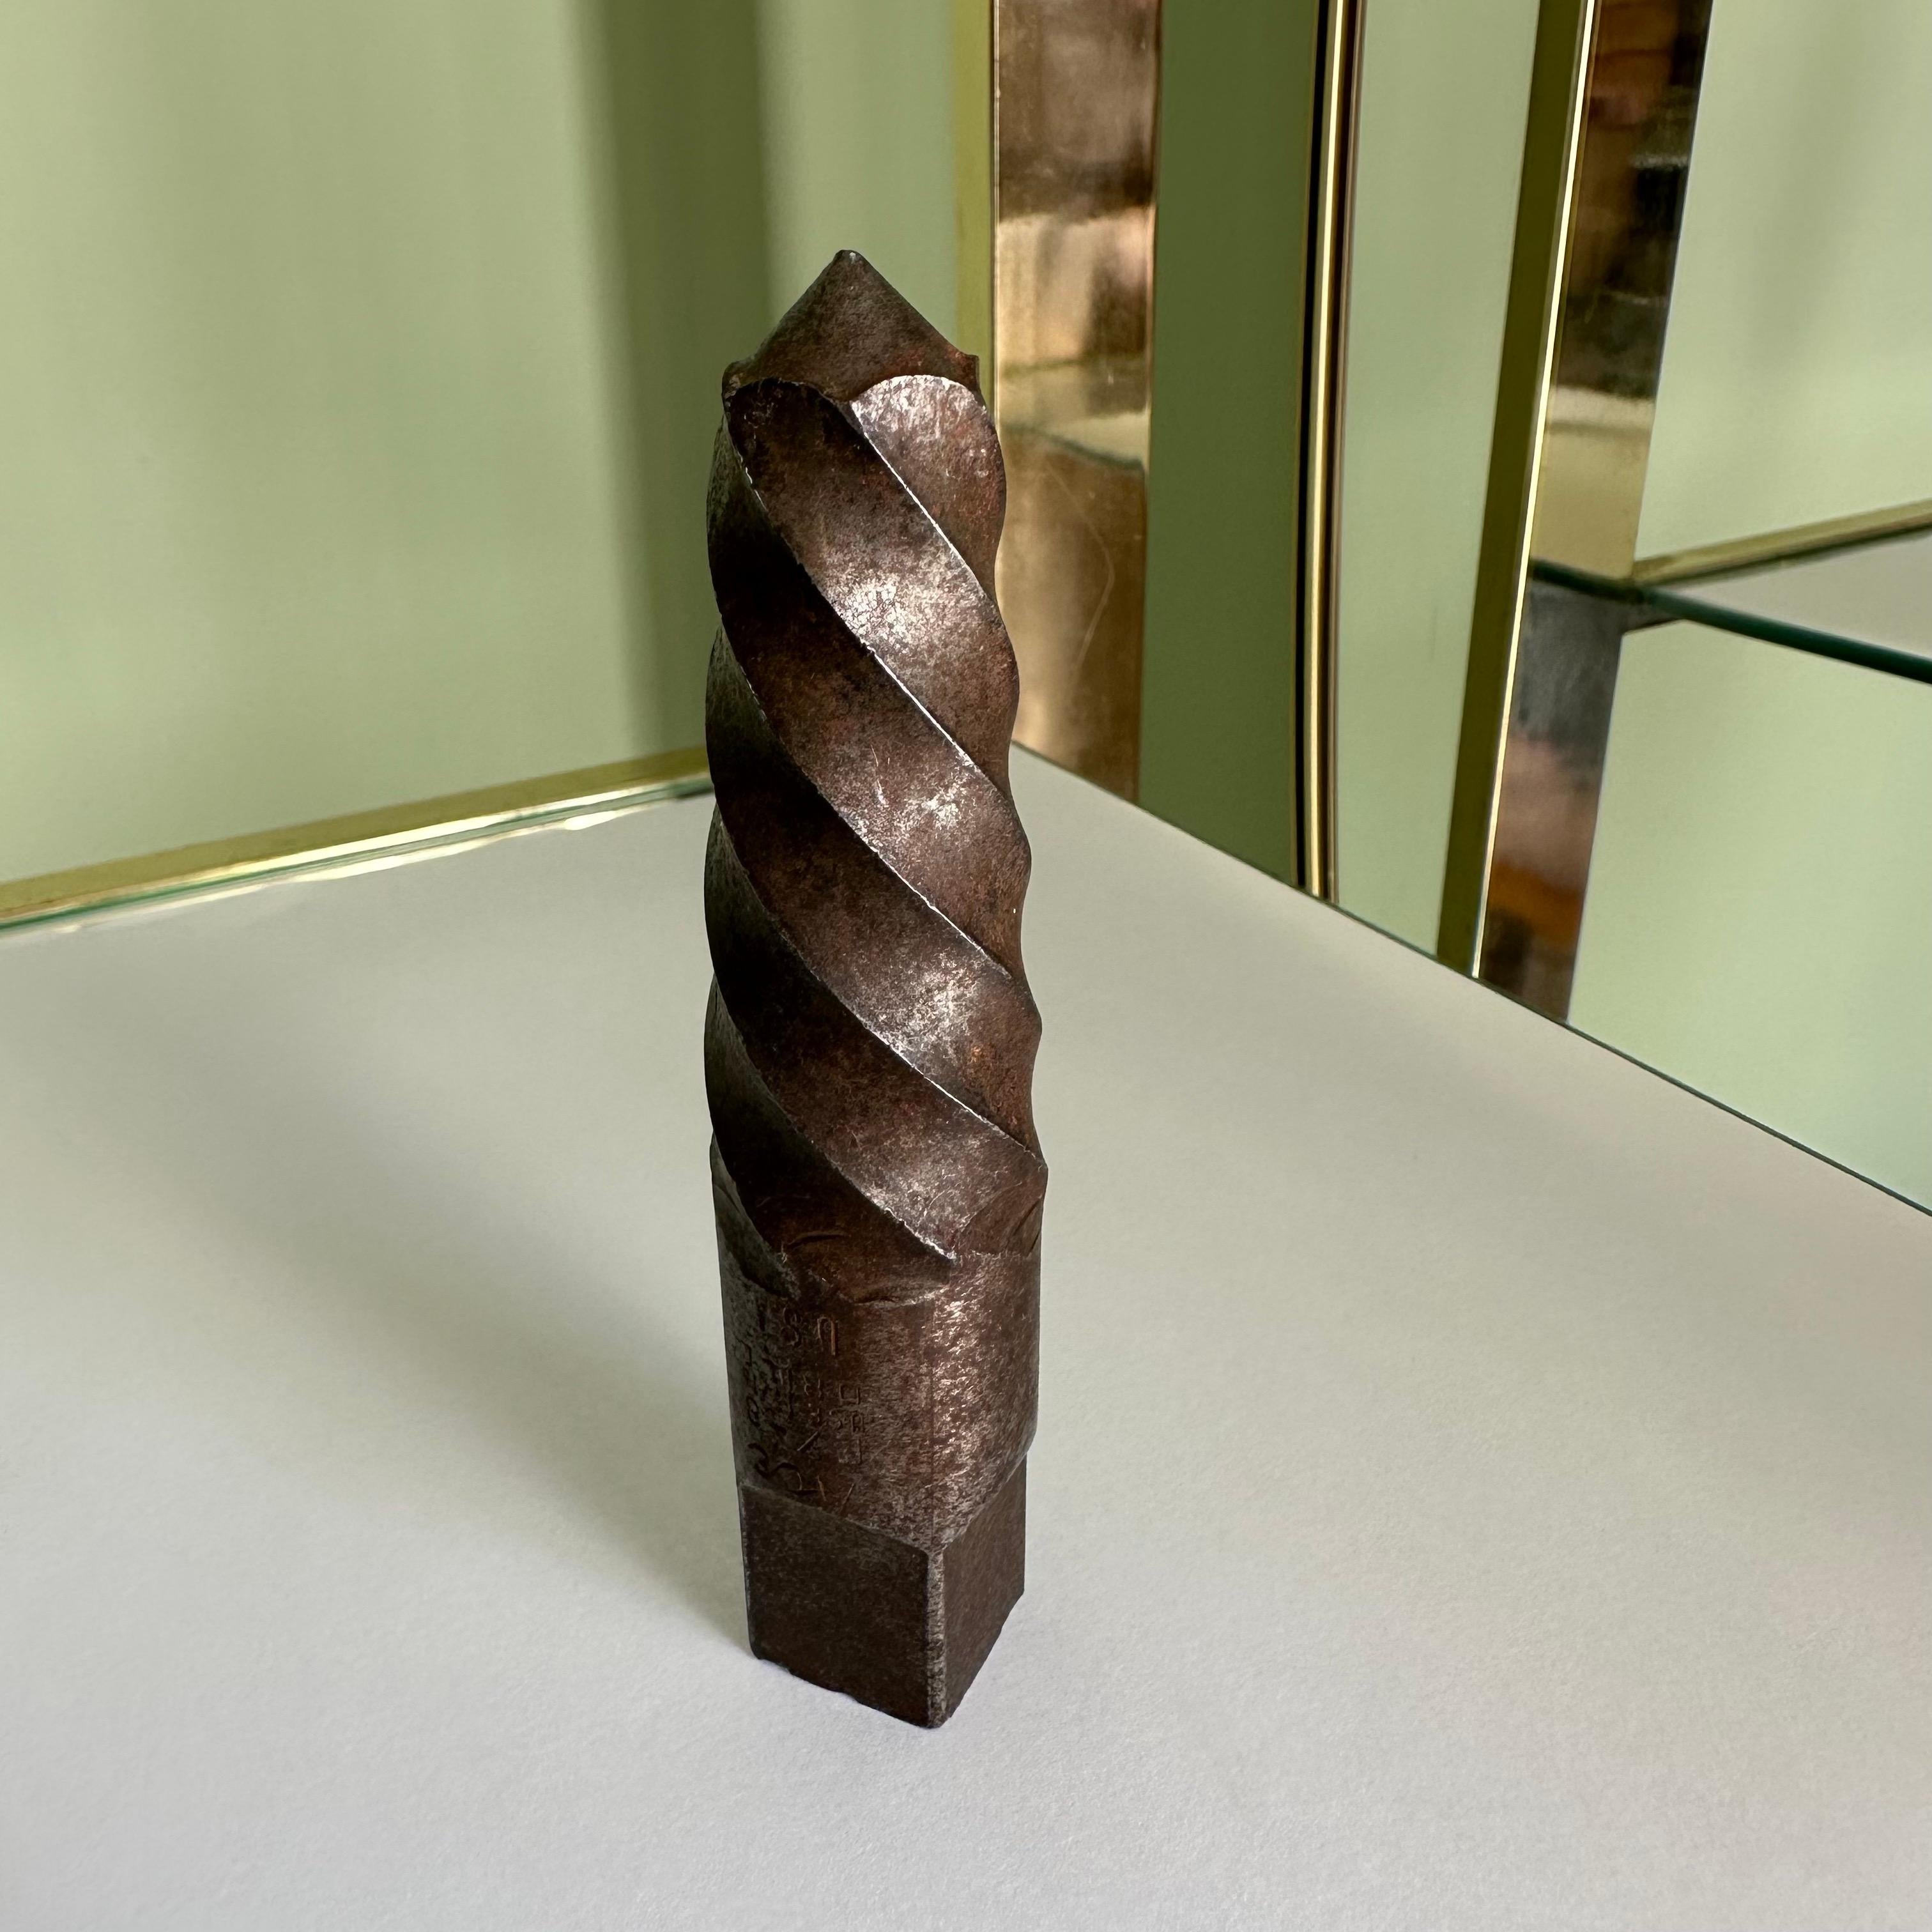 1970s pipe extractor bit with amazing patina used as a paperweight. Conical in shape with sculptural threading, this piece is great as a masculine desk object or accessory. 

From the estate of an NYC 1970's master plumber. 